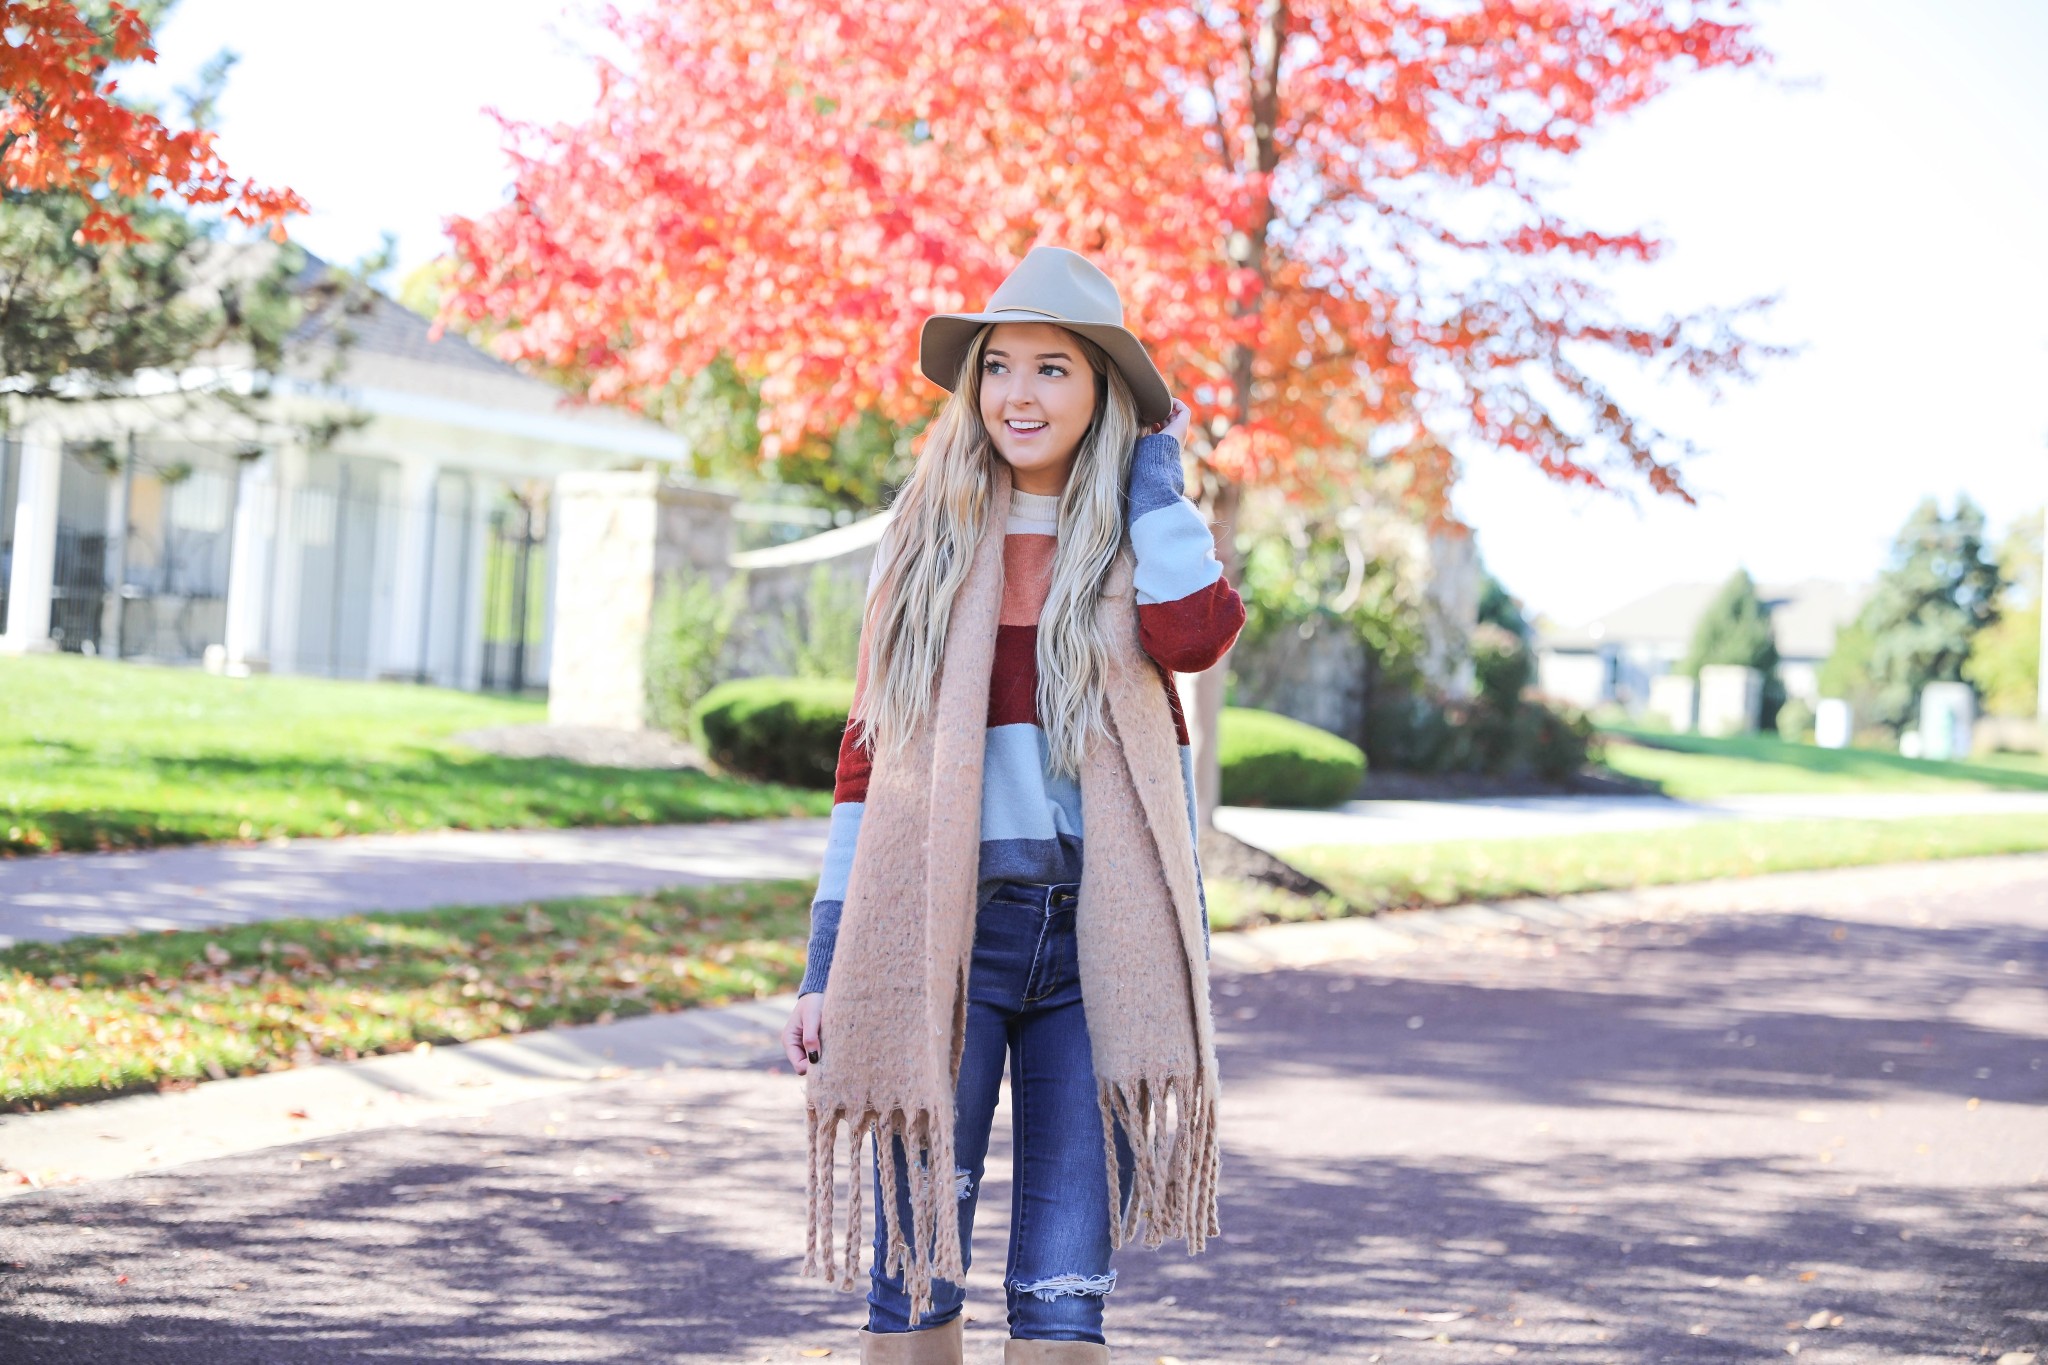 Colorblocking sweater from Madewell! Love this fall leaves picture! This fall outfit is perfect, I especially love the heavy scarf! Detail on fashion blog daily dose of charm by lauren lindmark